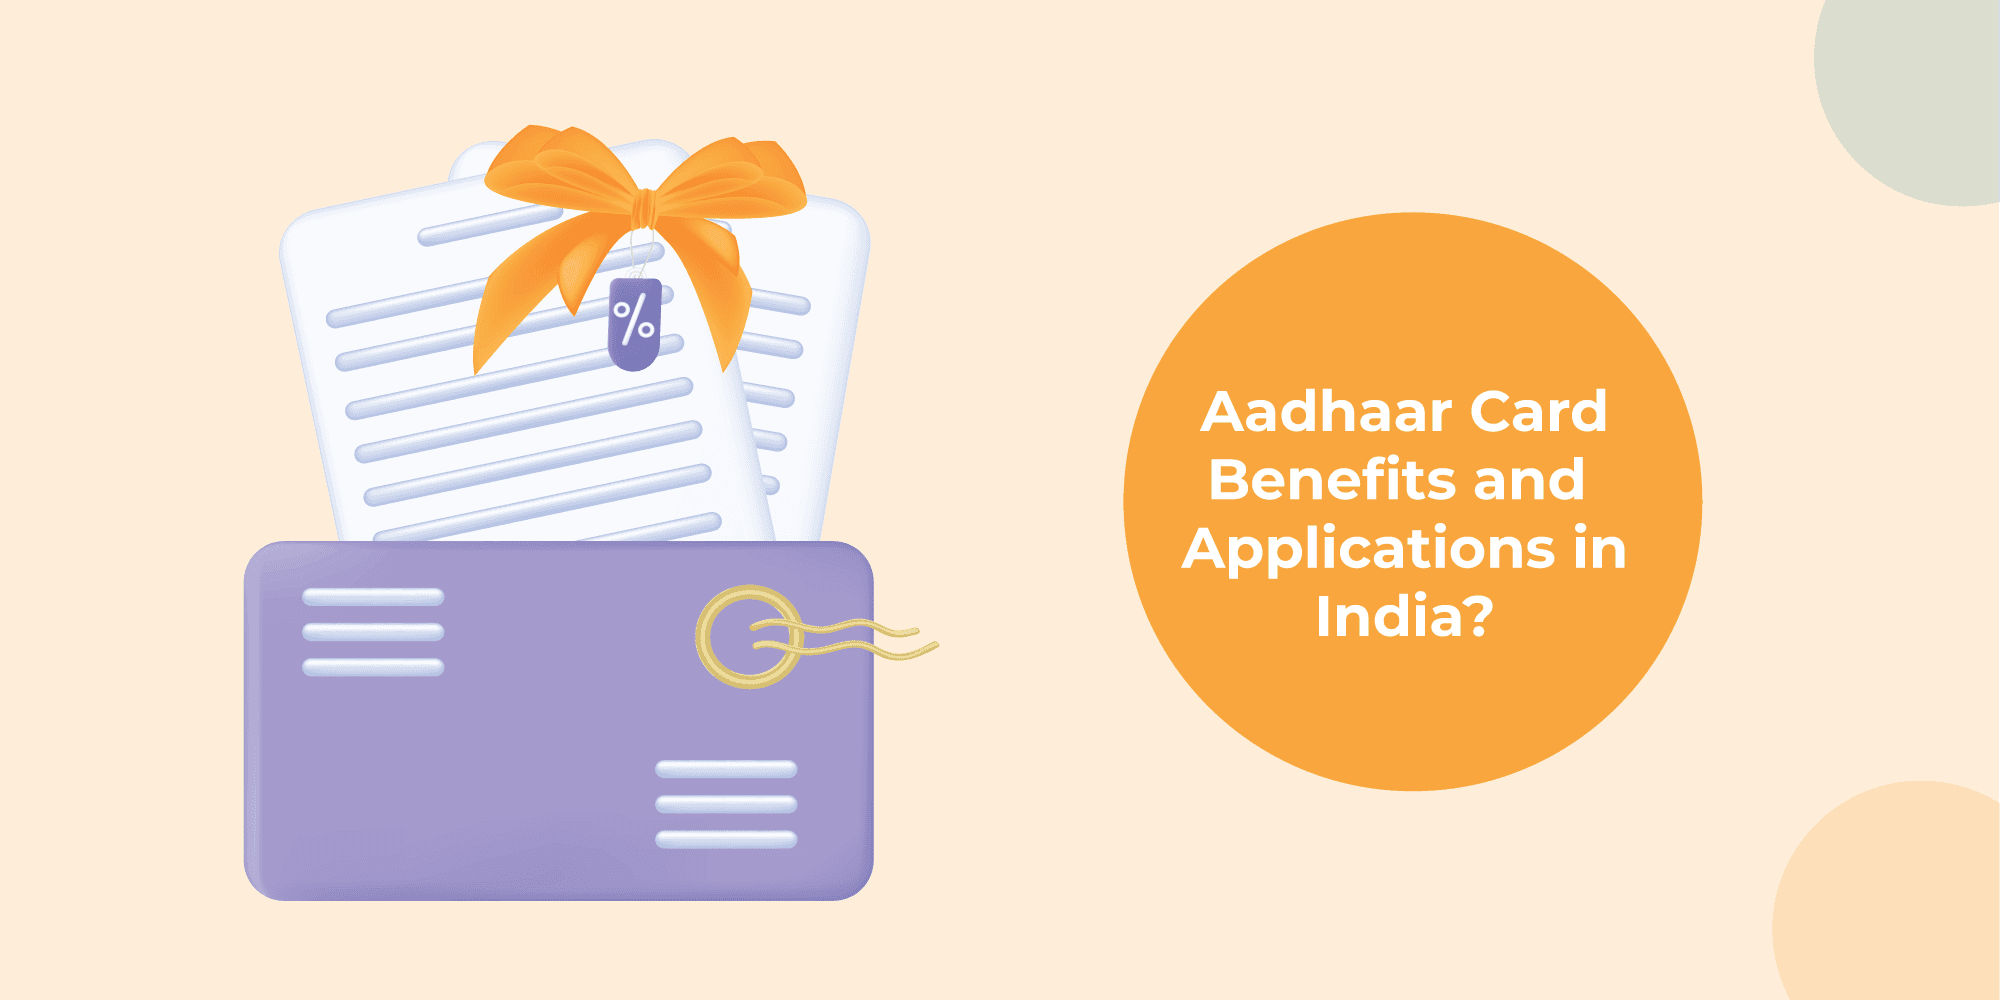 Top 5 benefits of an Aadhaar card you should know about